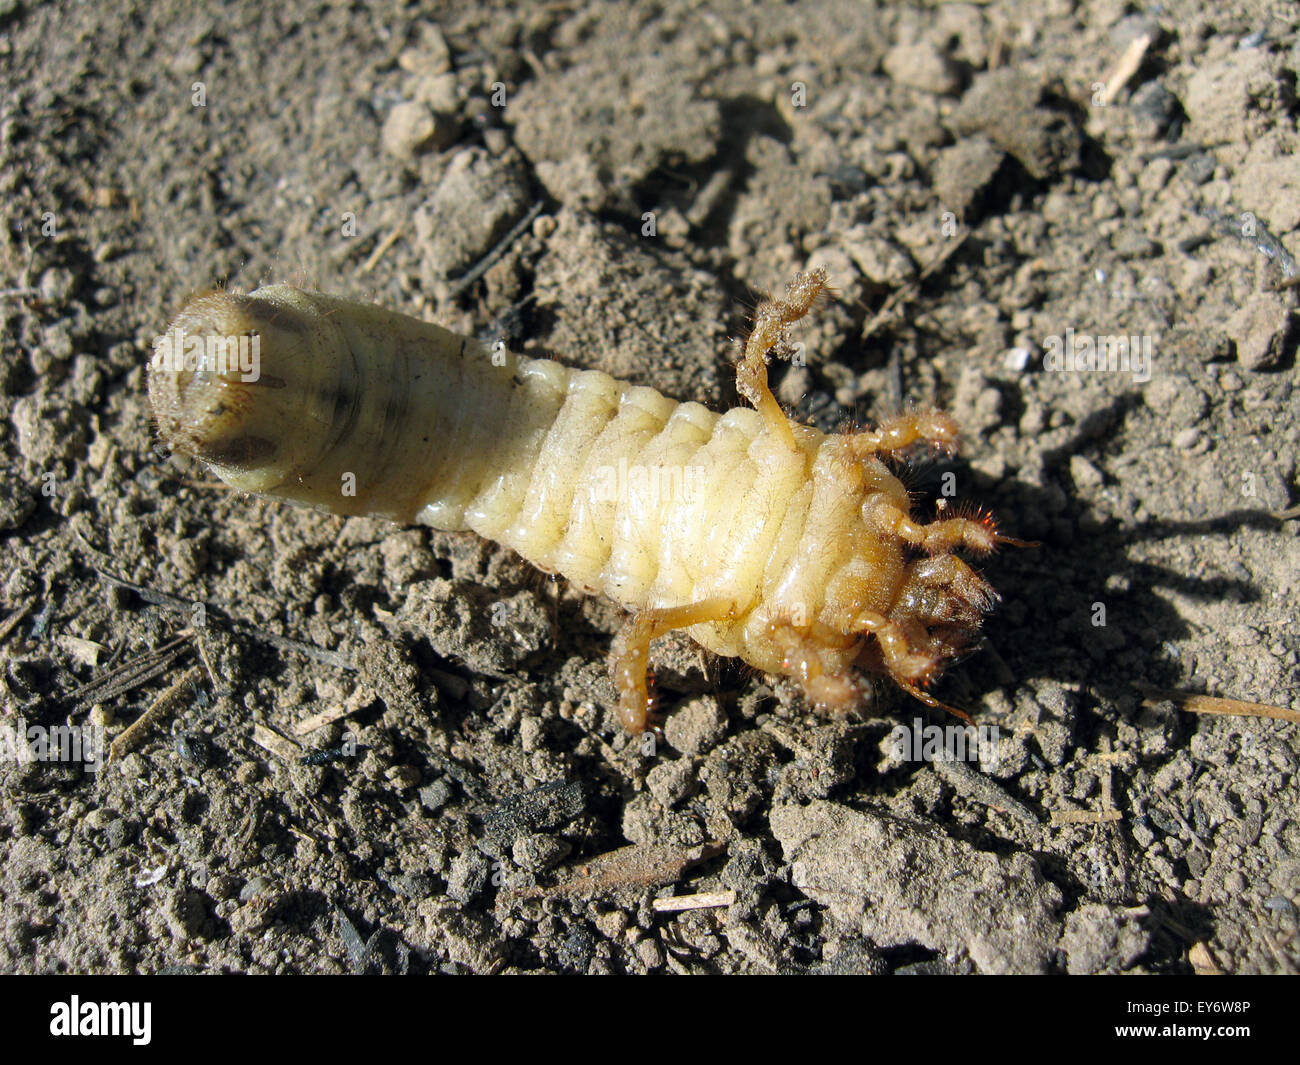 larva of may-bug on laying on the ground Stock Photo